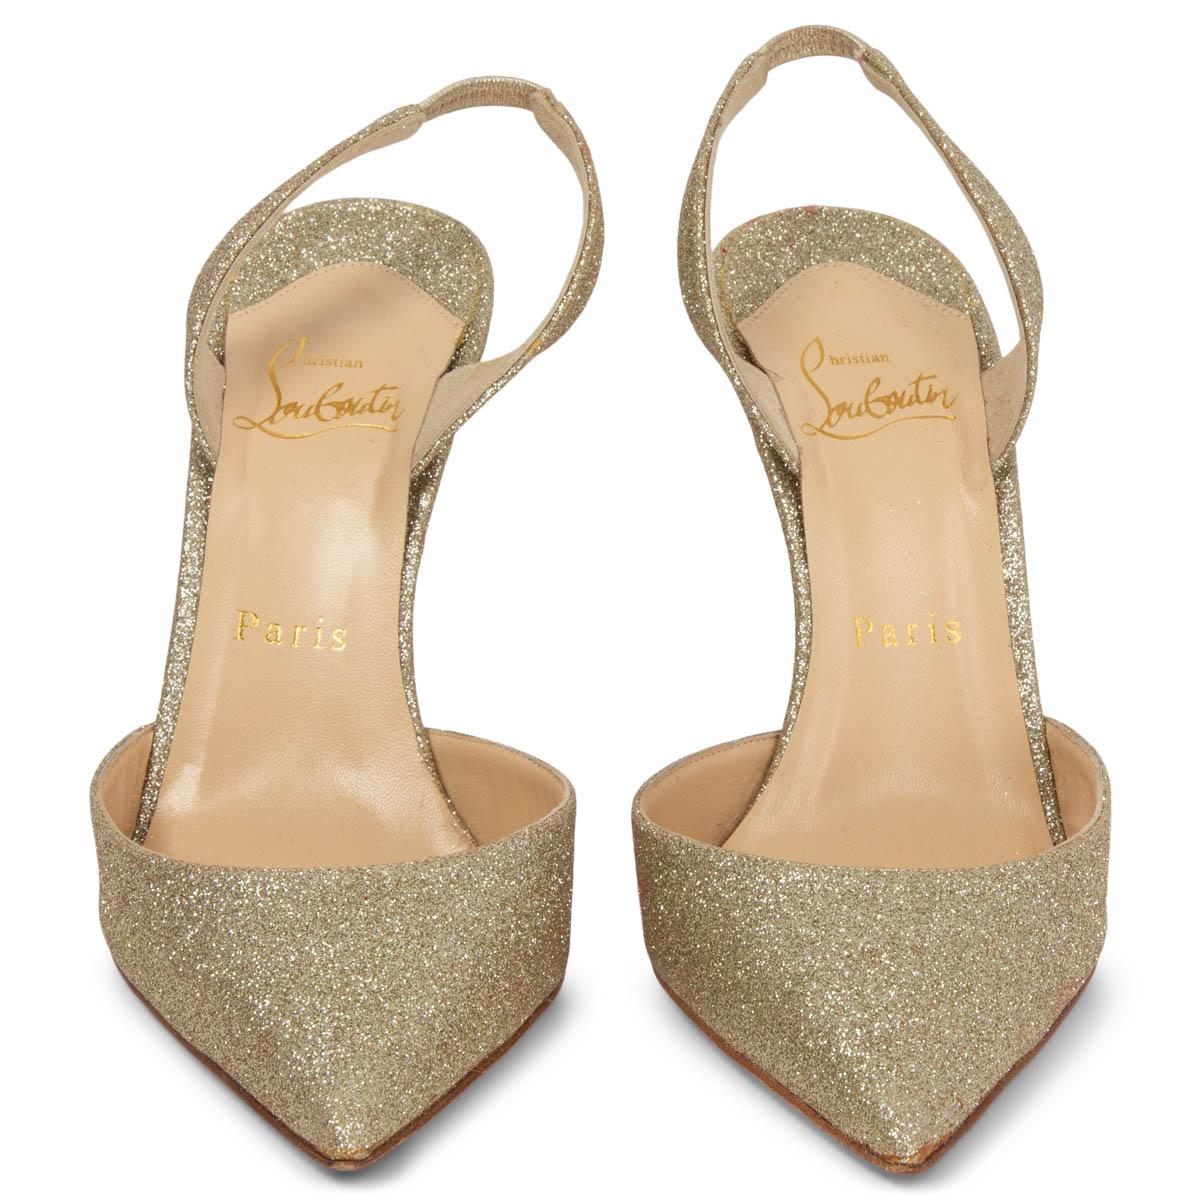 100% authentic Christian Louboutin Platine Mini Glitter Ever 100 Slingback Pumps in gold-tone glitter. Have been worn once inside however the glue is showing in parts on the back. Overall in virtually new condition. Come with dust bag.